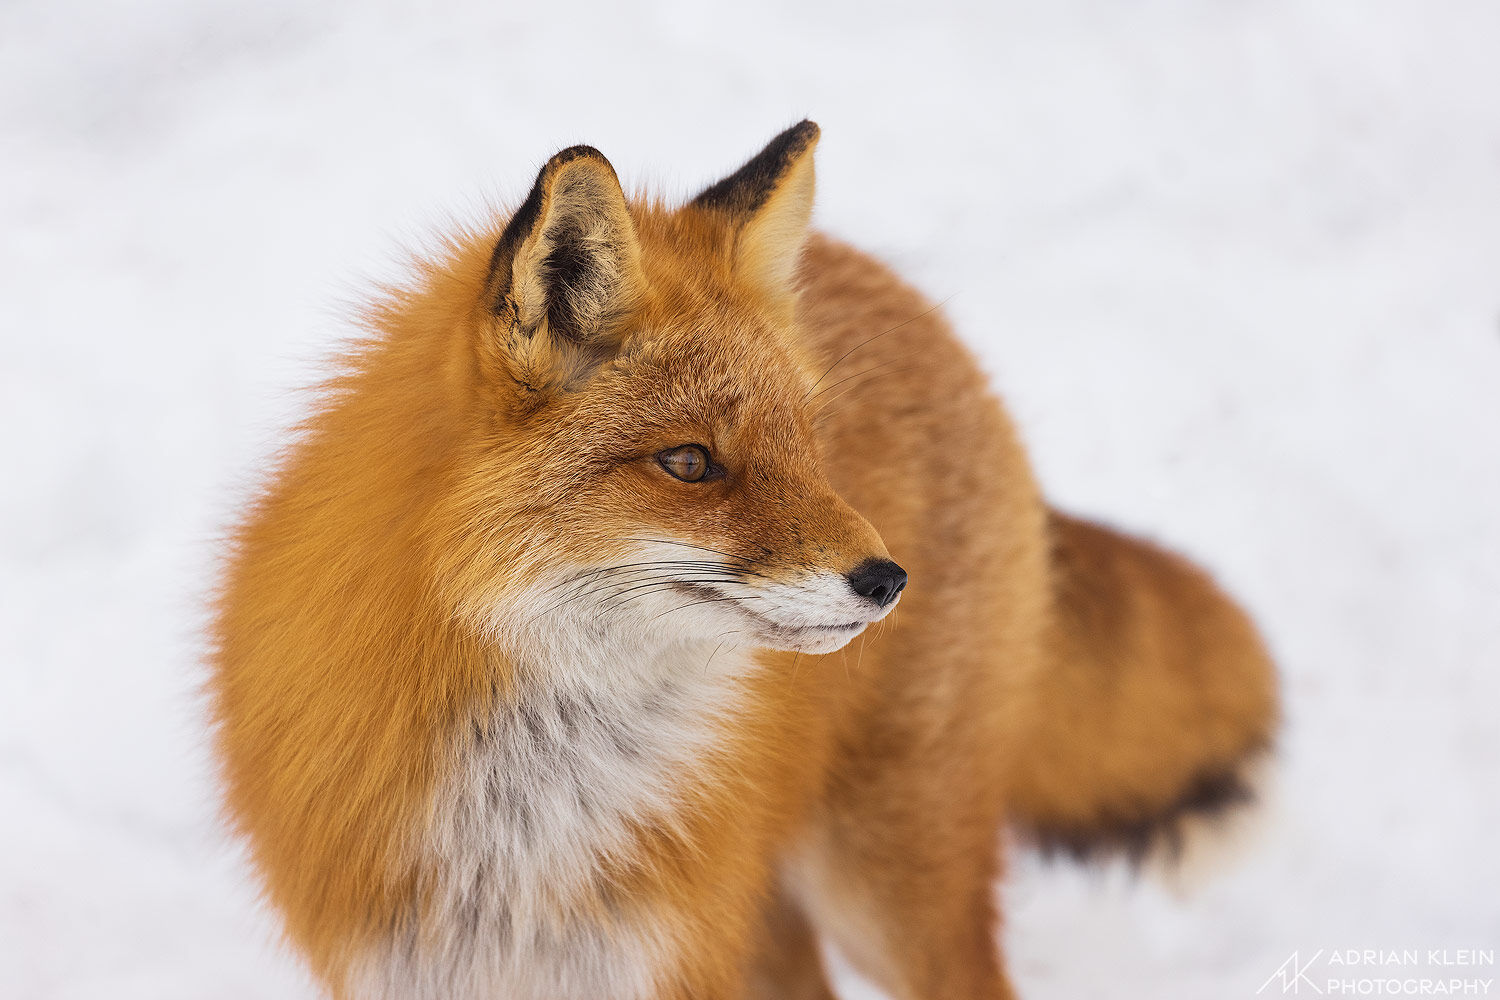 A female fox stops to take a look around with her bright and fluffy winter coat.